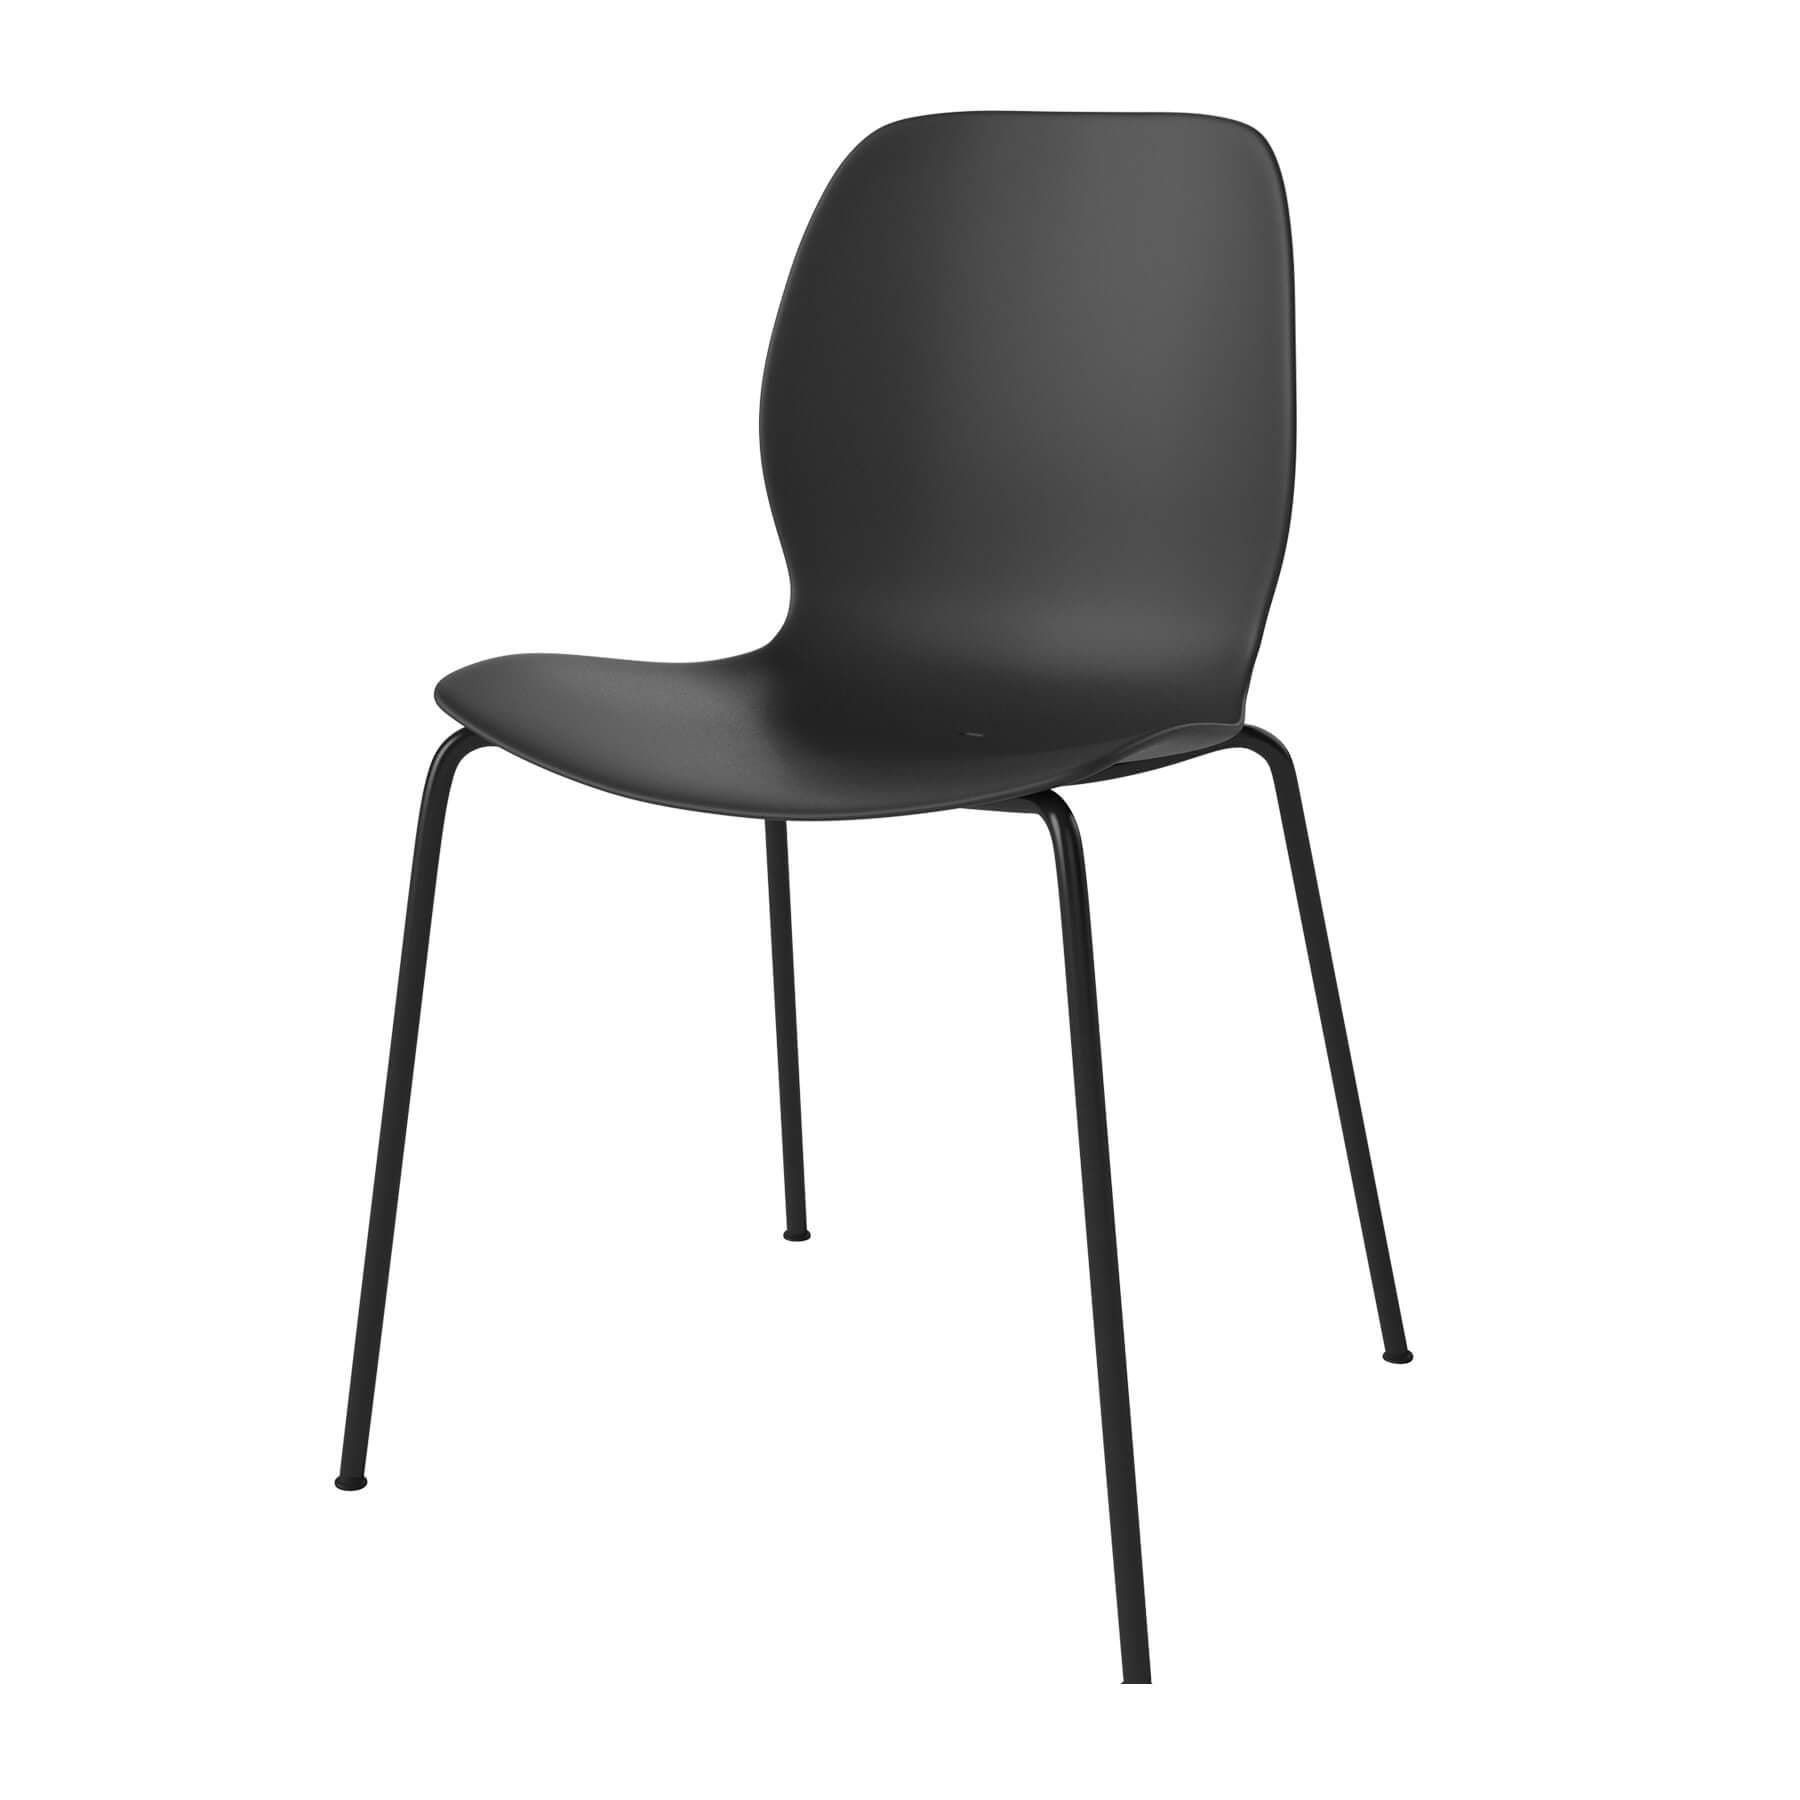 Bolia Seed Garden Chair Black Designer Furniture From Holloways Of Ludlow